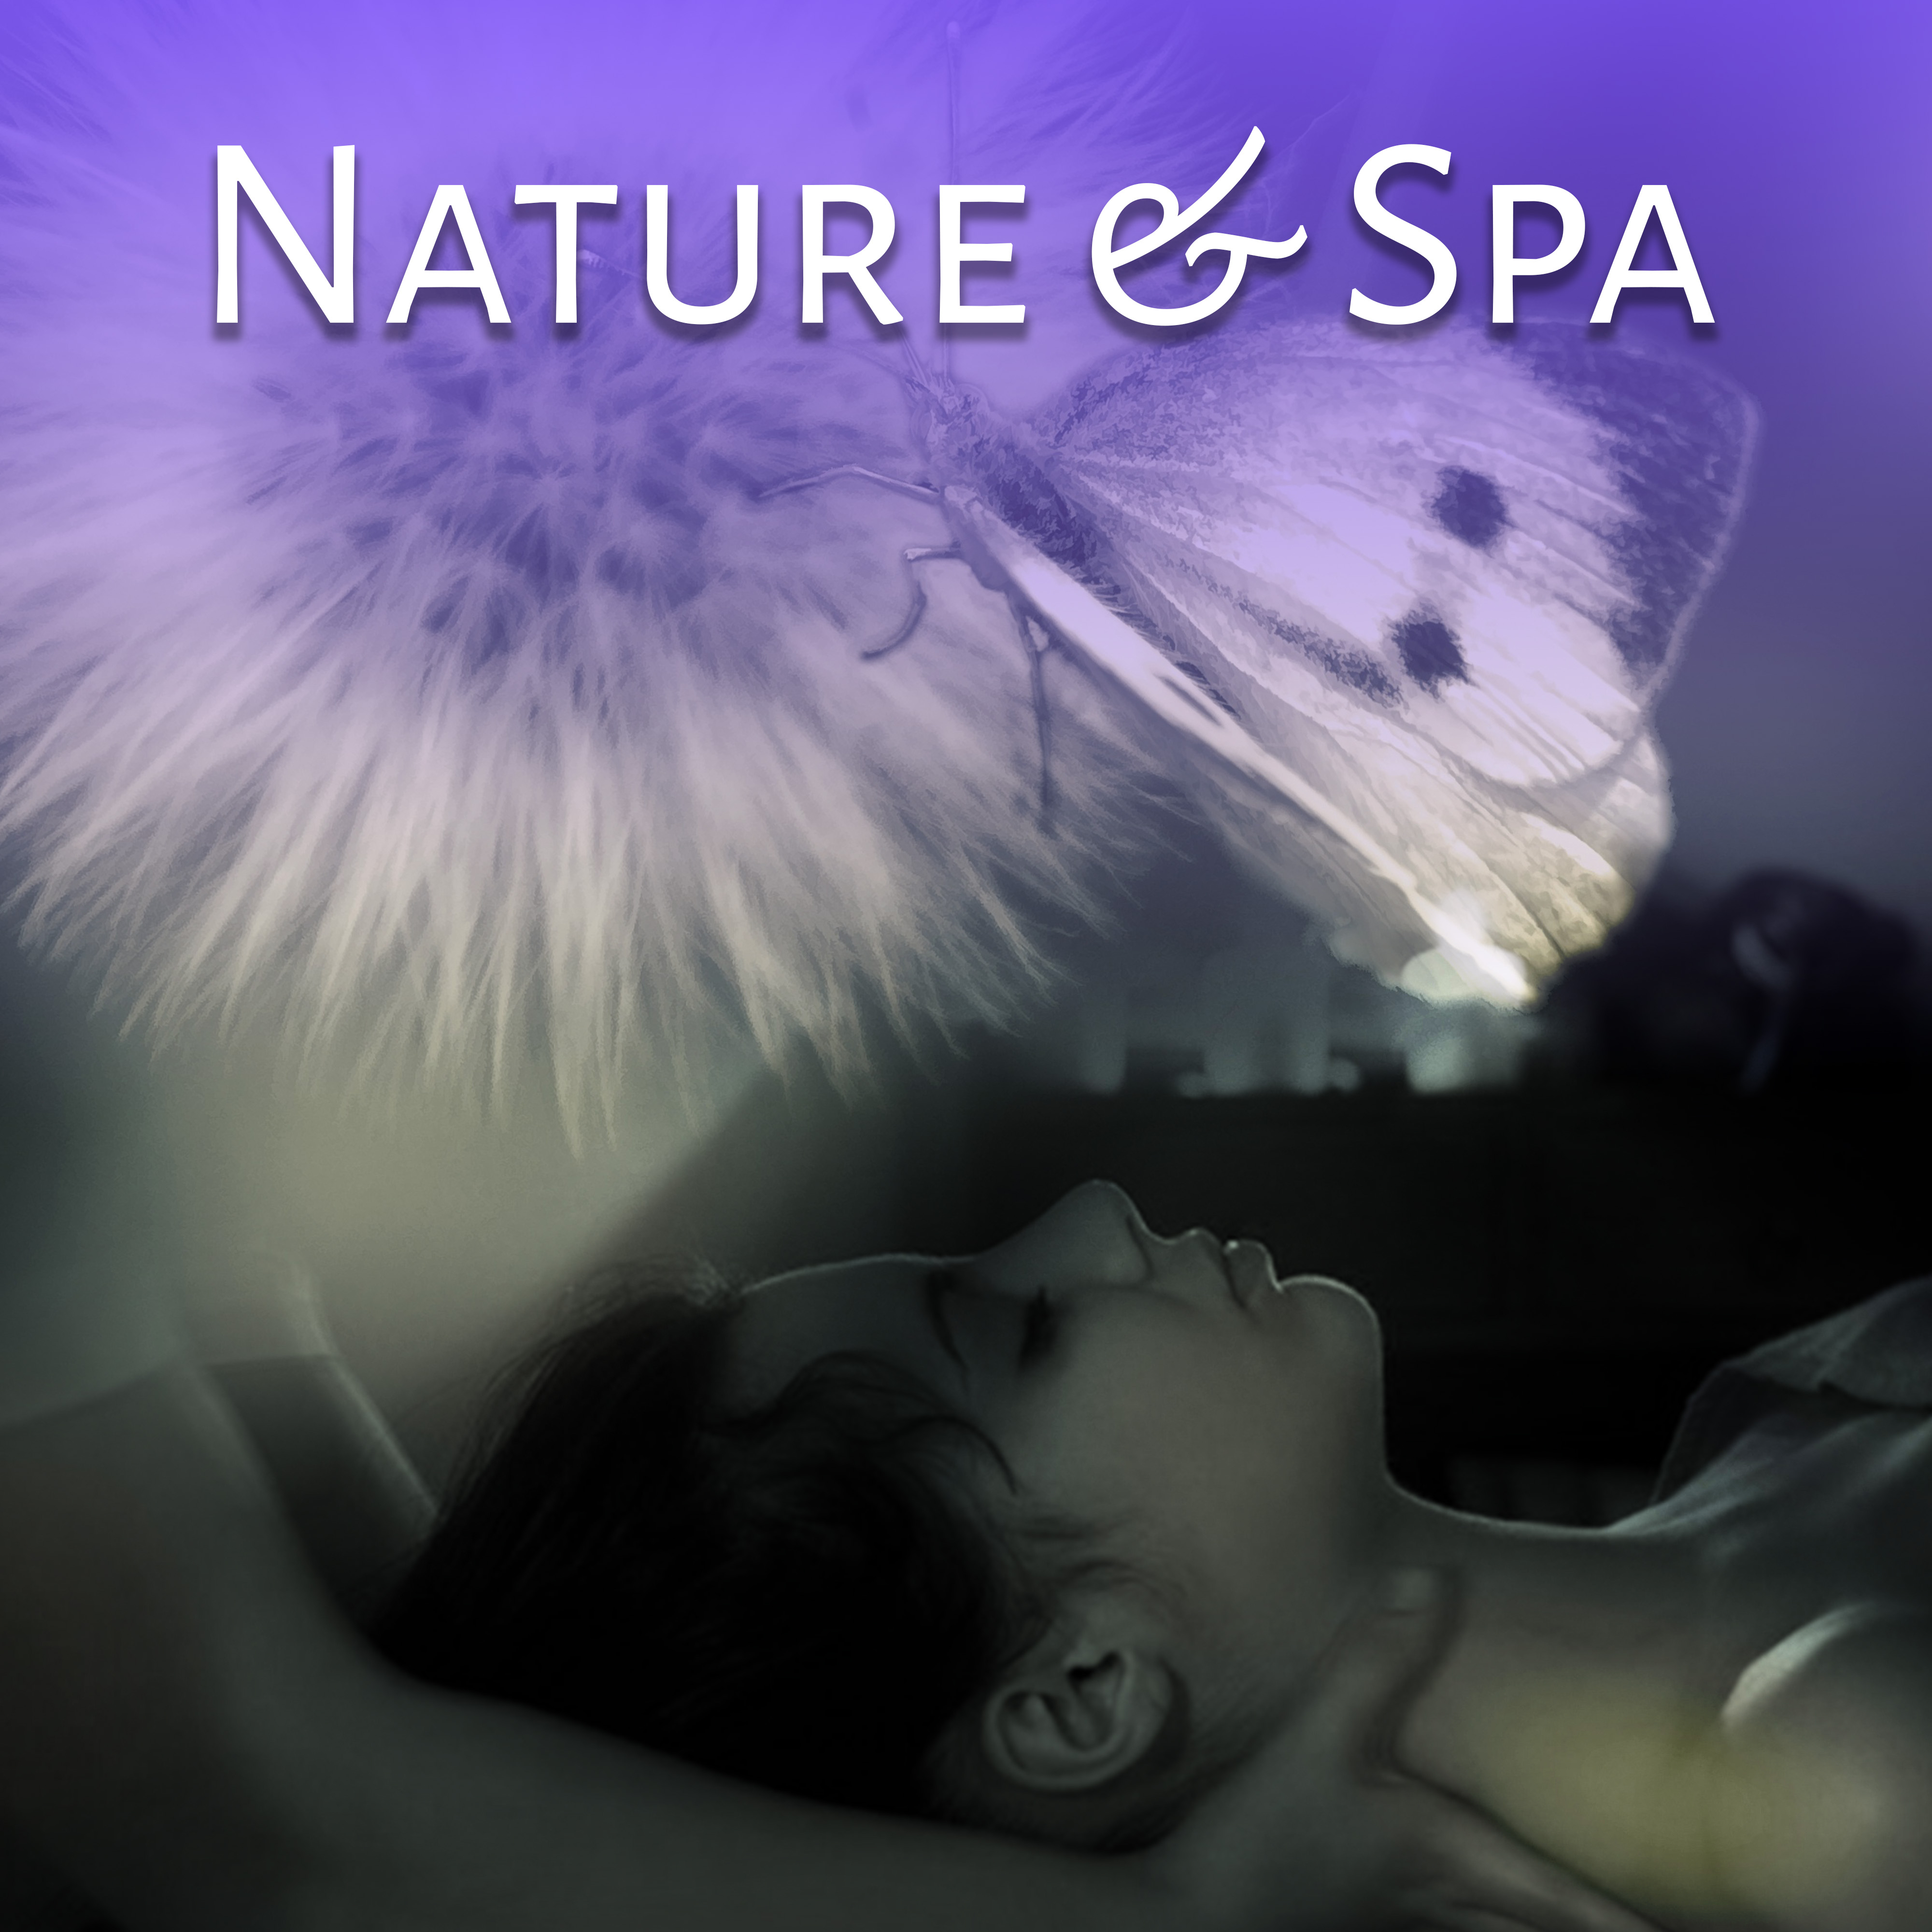 Nature & Spa – Soothing Music for Relaxation, Relief, Pure Massage, Nature Sounds for Body, Wellness, Spa Music